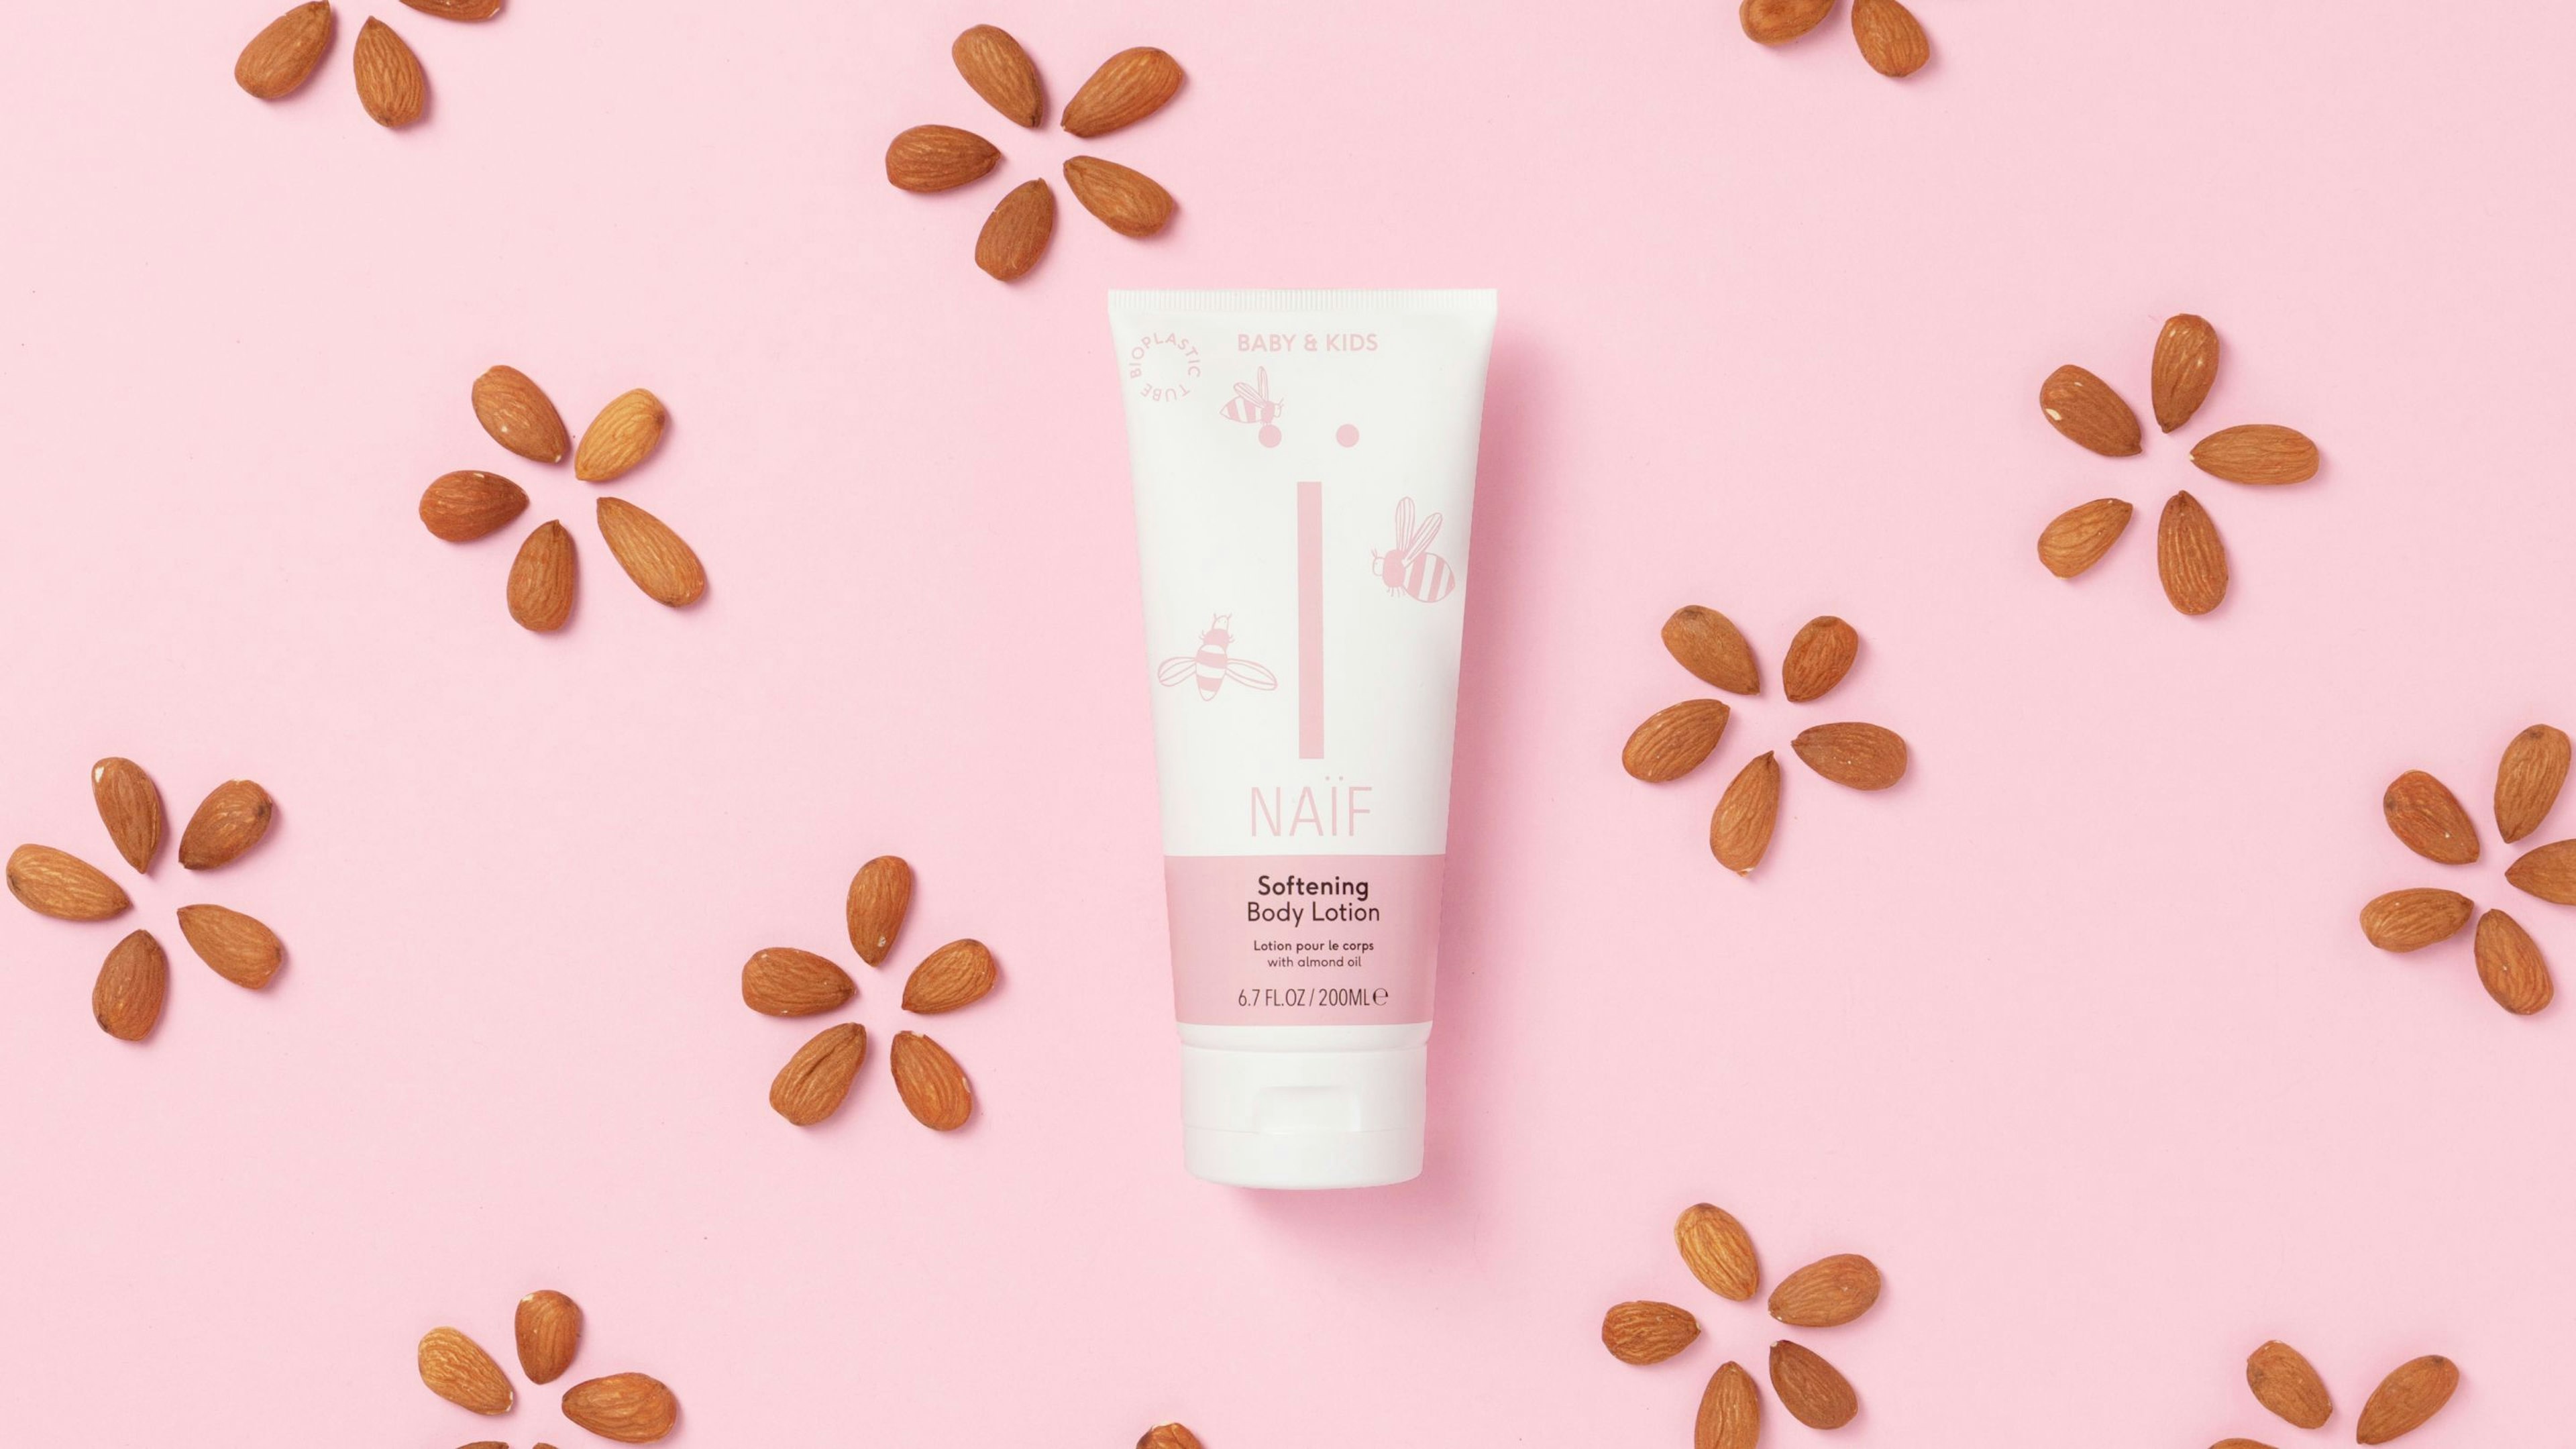 A pink background with Naïf brand softening body lotion in the foreground